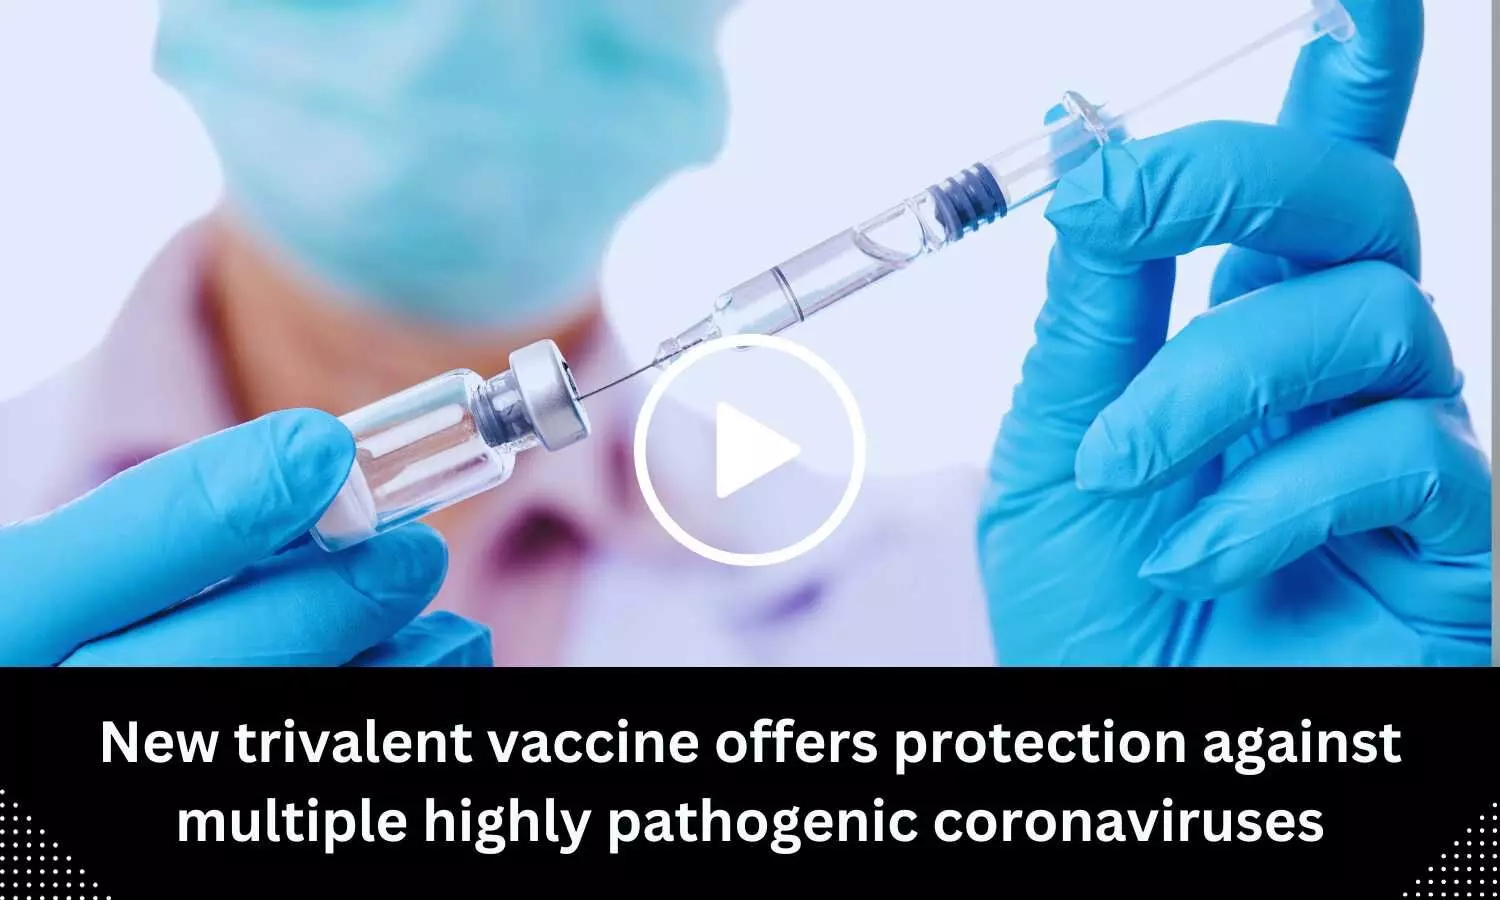 New trivalent vaccine offers protection against multiple highly pathogenic coronaviruses